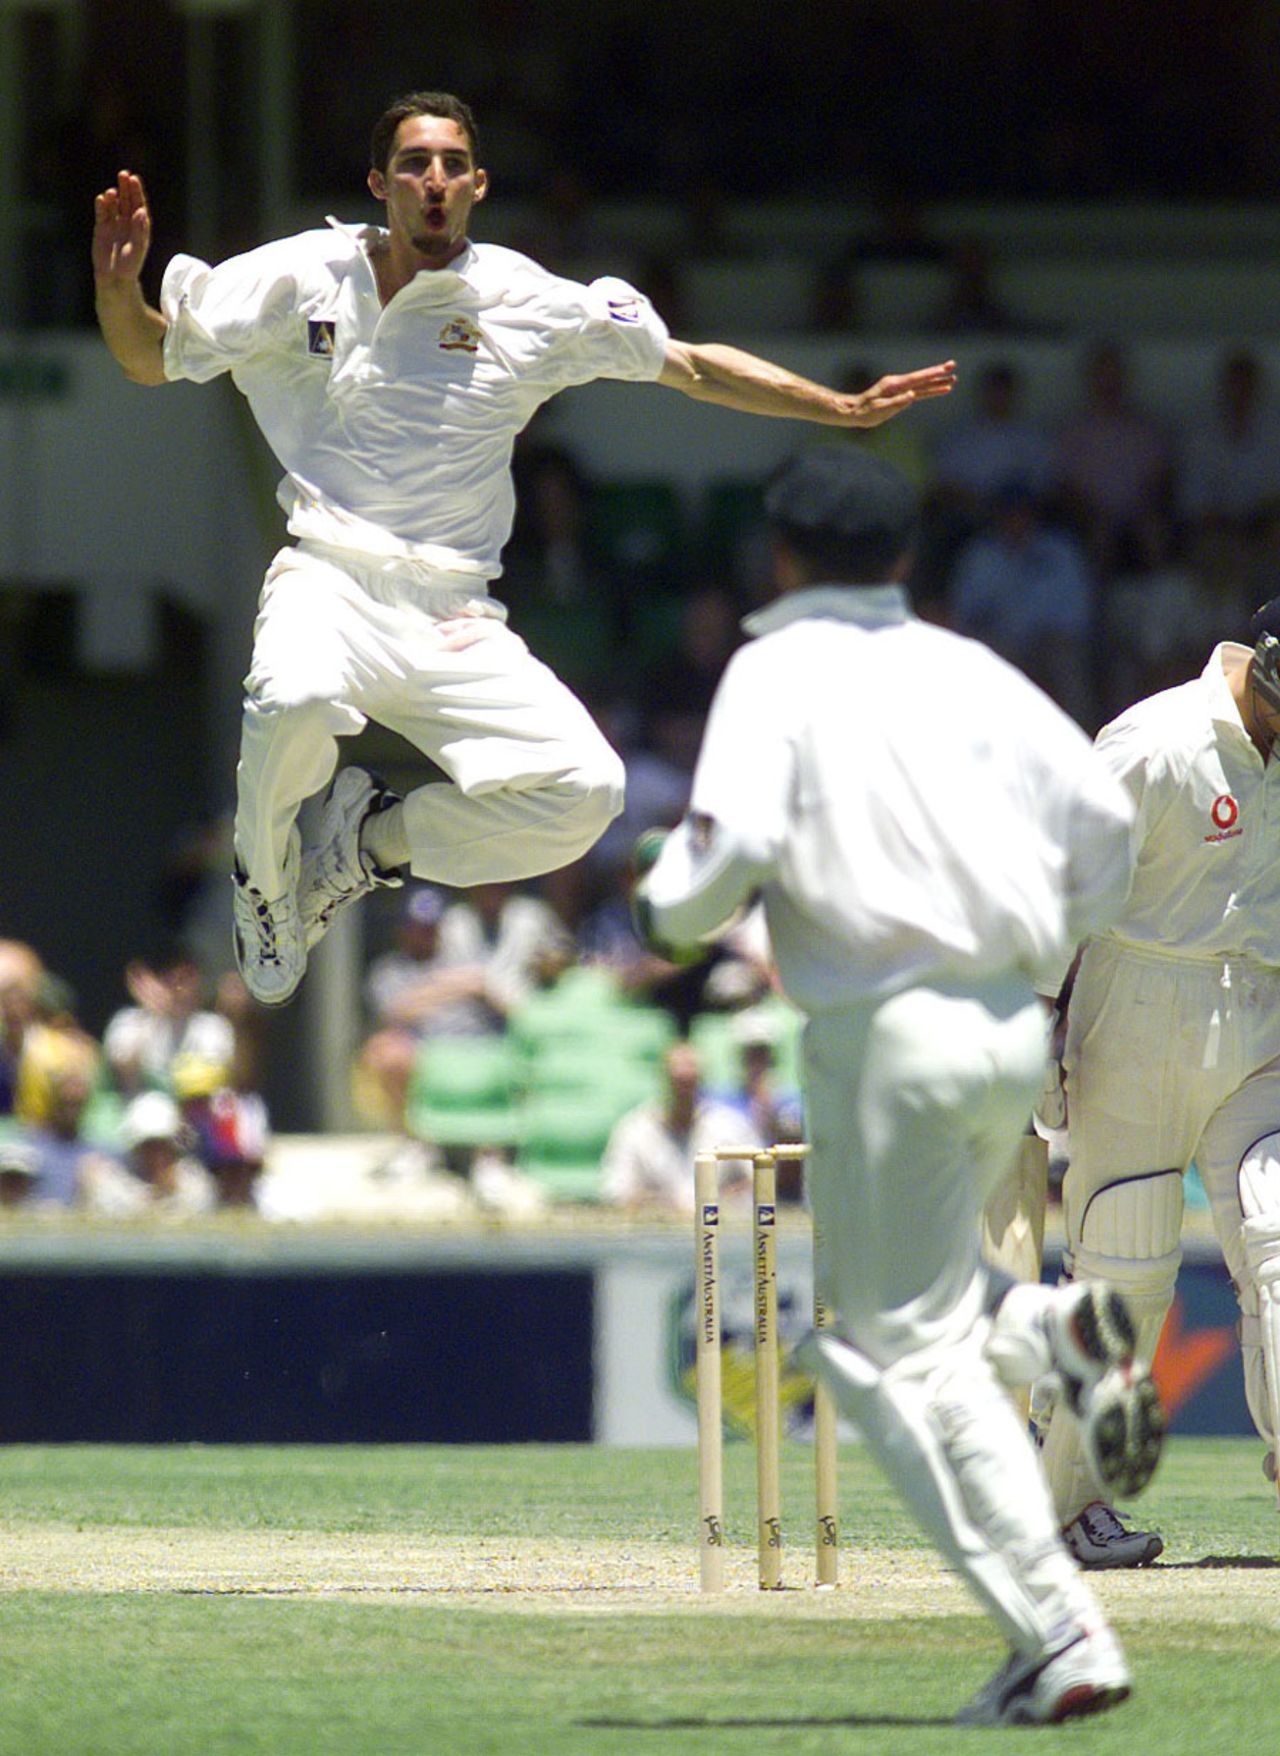 Jason Gillespie jumps in the air as Darren Gough is out leg before wicket, Australia v England, 2nd Test, Perth, 3rd day, November 30, 1998